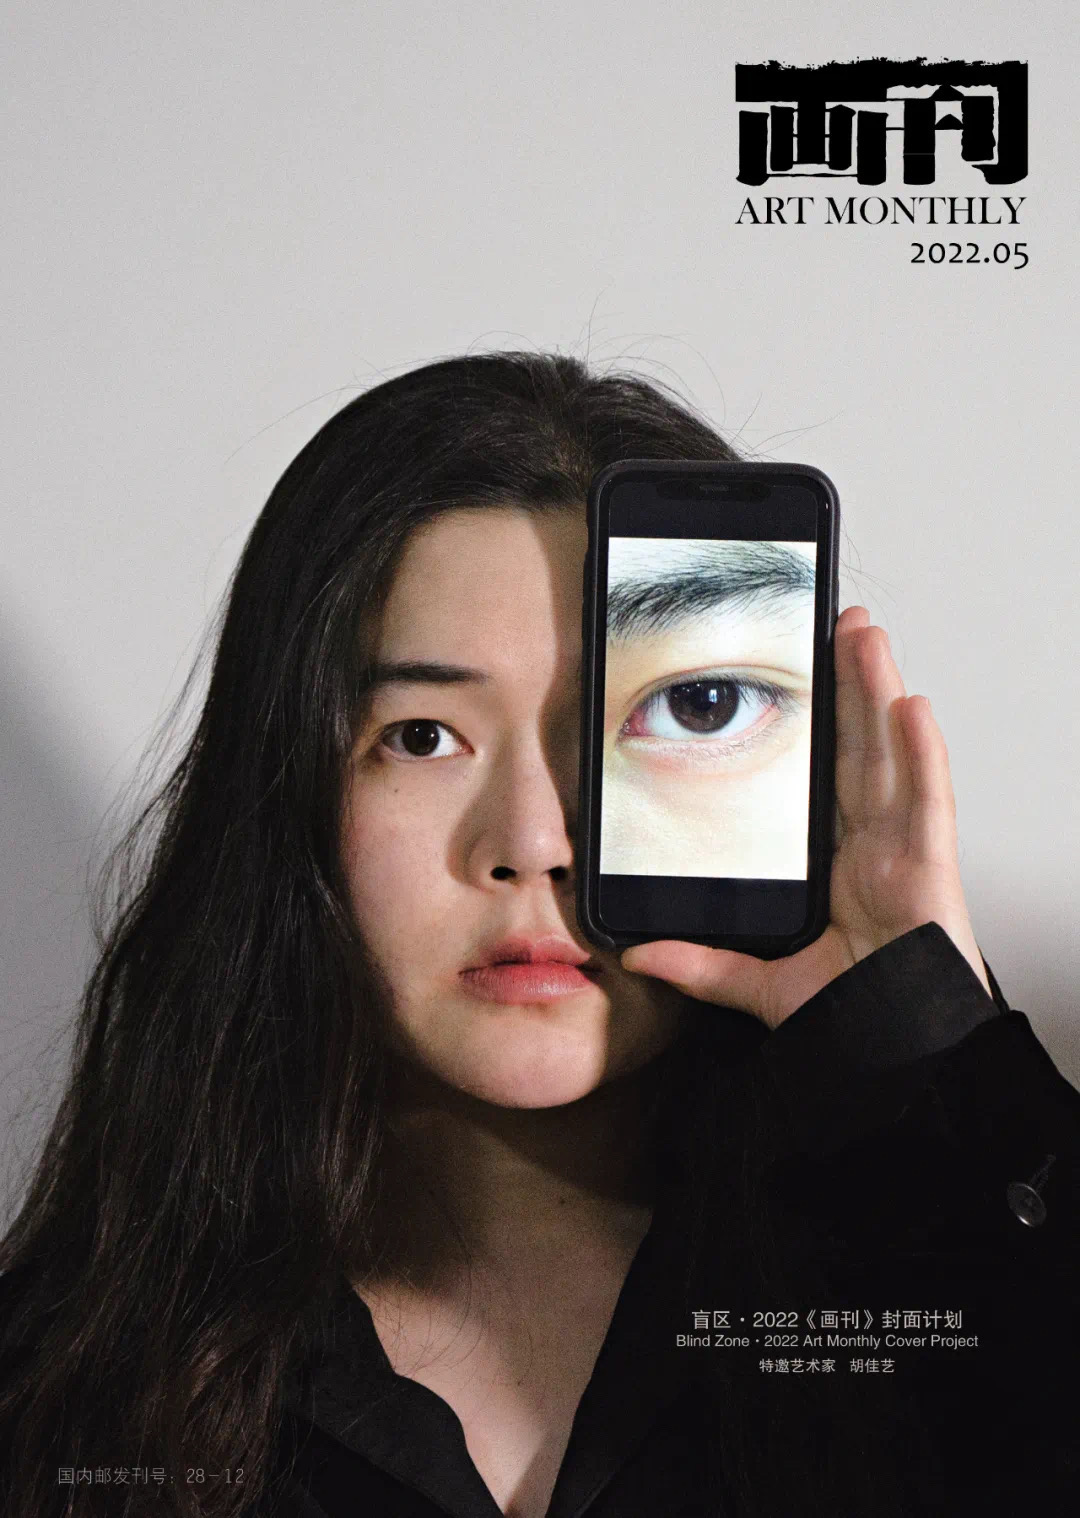 “Envisioner”, “Visual Illusion”, and “Mass-production”: Three Key Words for Rethinking Contemporary Image Creation （feature article) “凝想者”“视觉幻觉”与“批量生产”：重思当下图像创作的三个关键词 (专题文章）